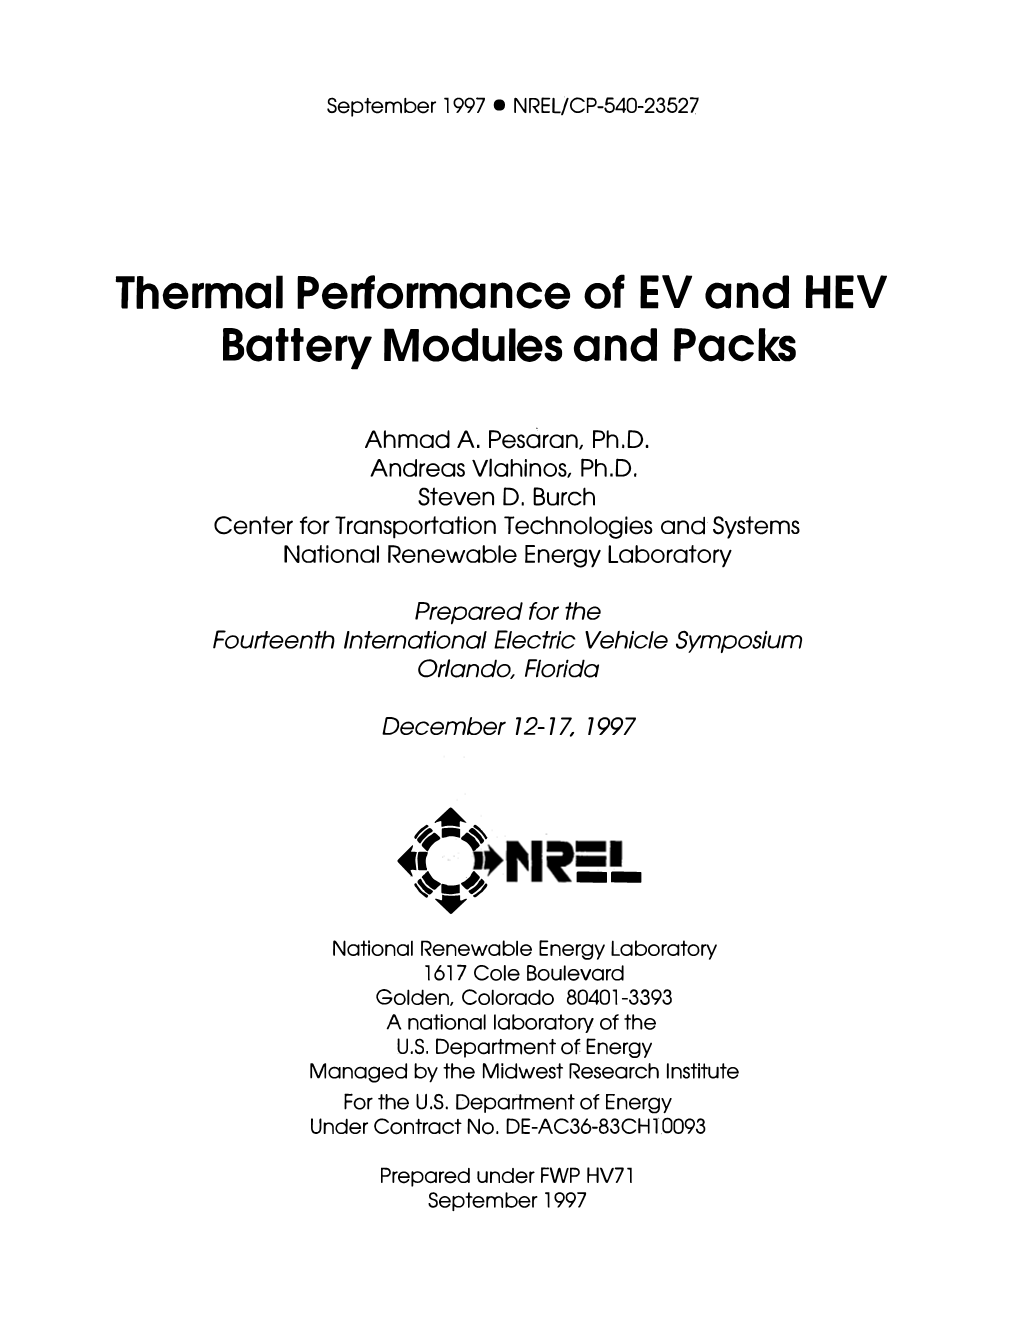 Thermal Performance of EV and HEV Battery Modules and Packs